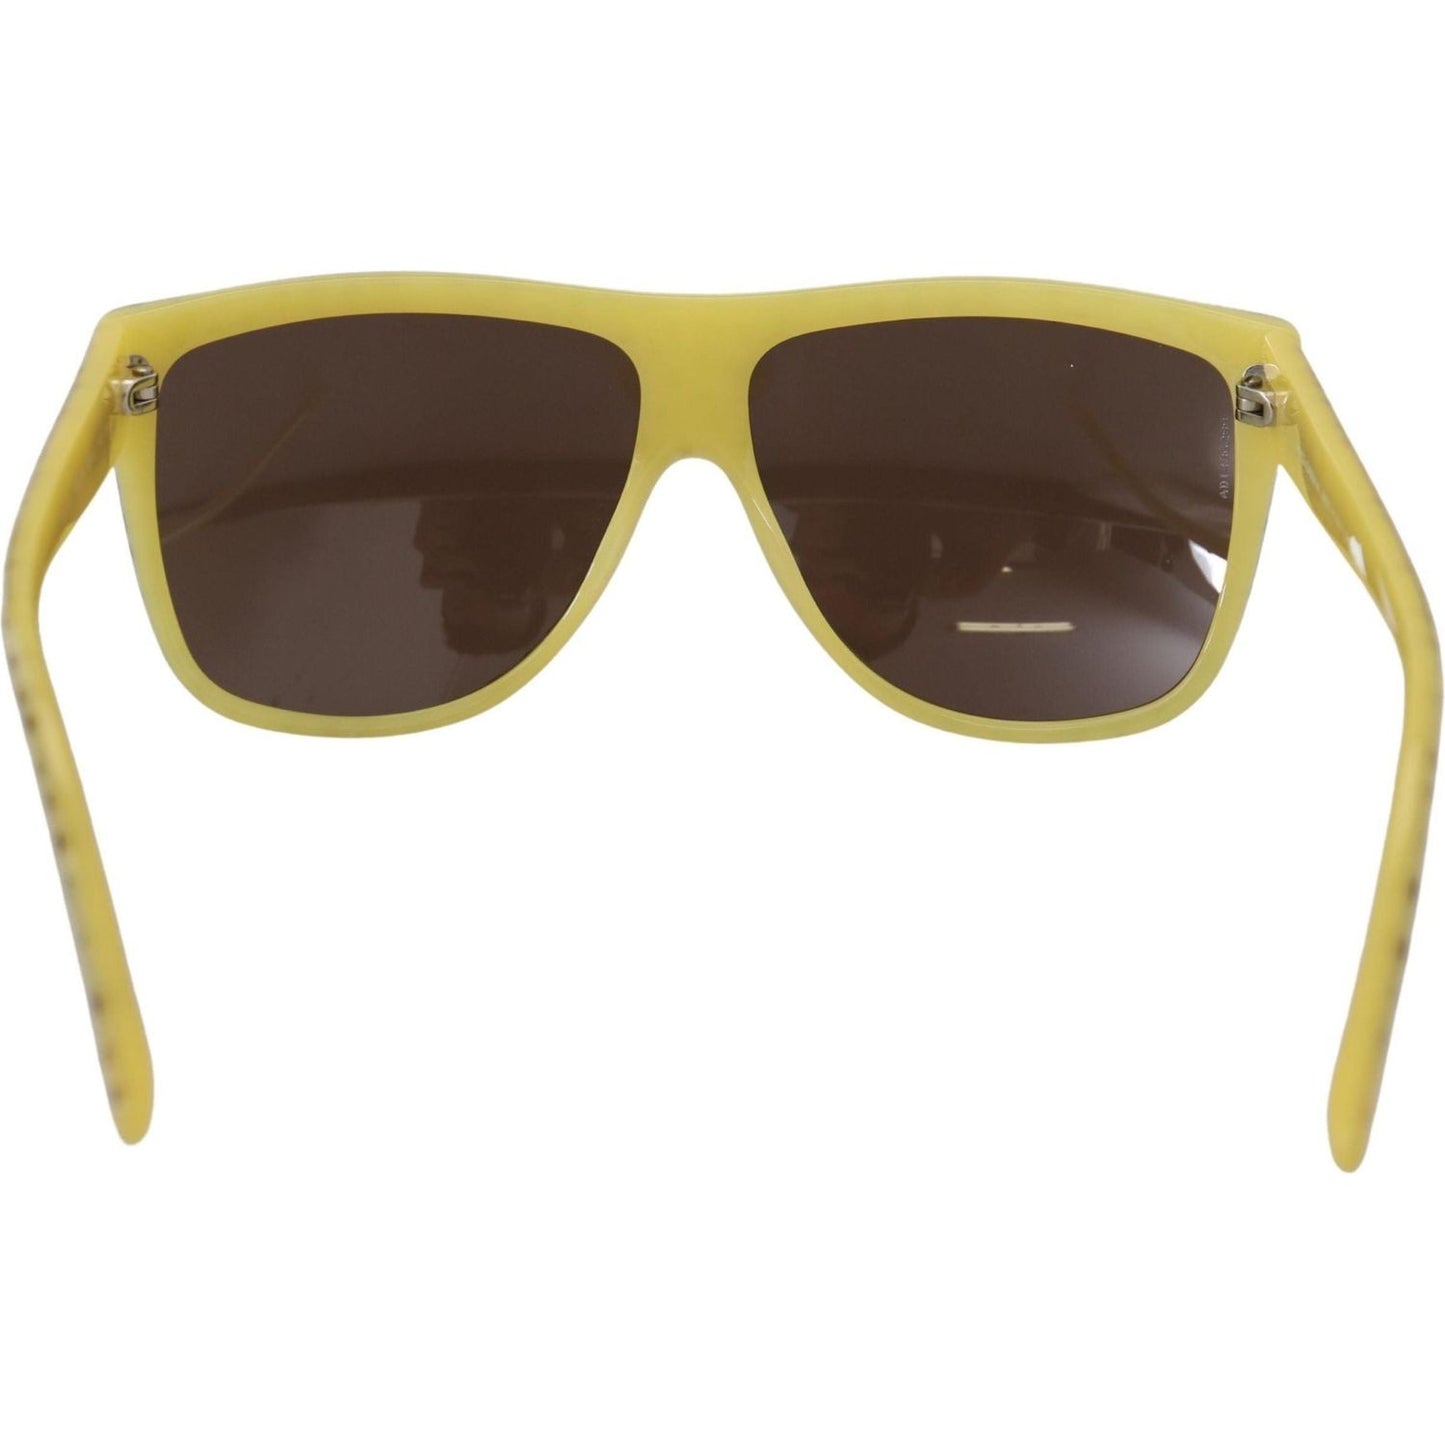 Dolce & Gabbana Stellar Chic Square Sunglasses in Yellow yellow-stars-acetate-square-shades-dg4125-sunglasses IMG_5271-scaled-19d95a92-784.jpg